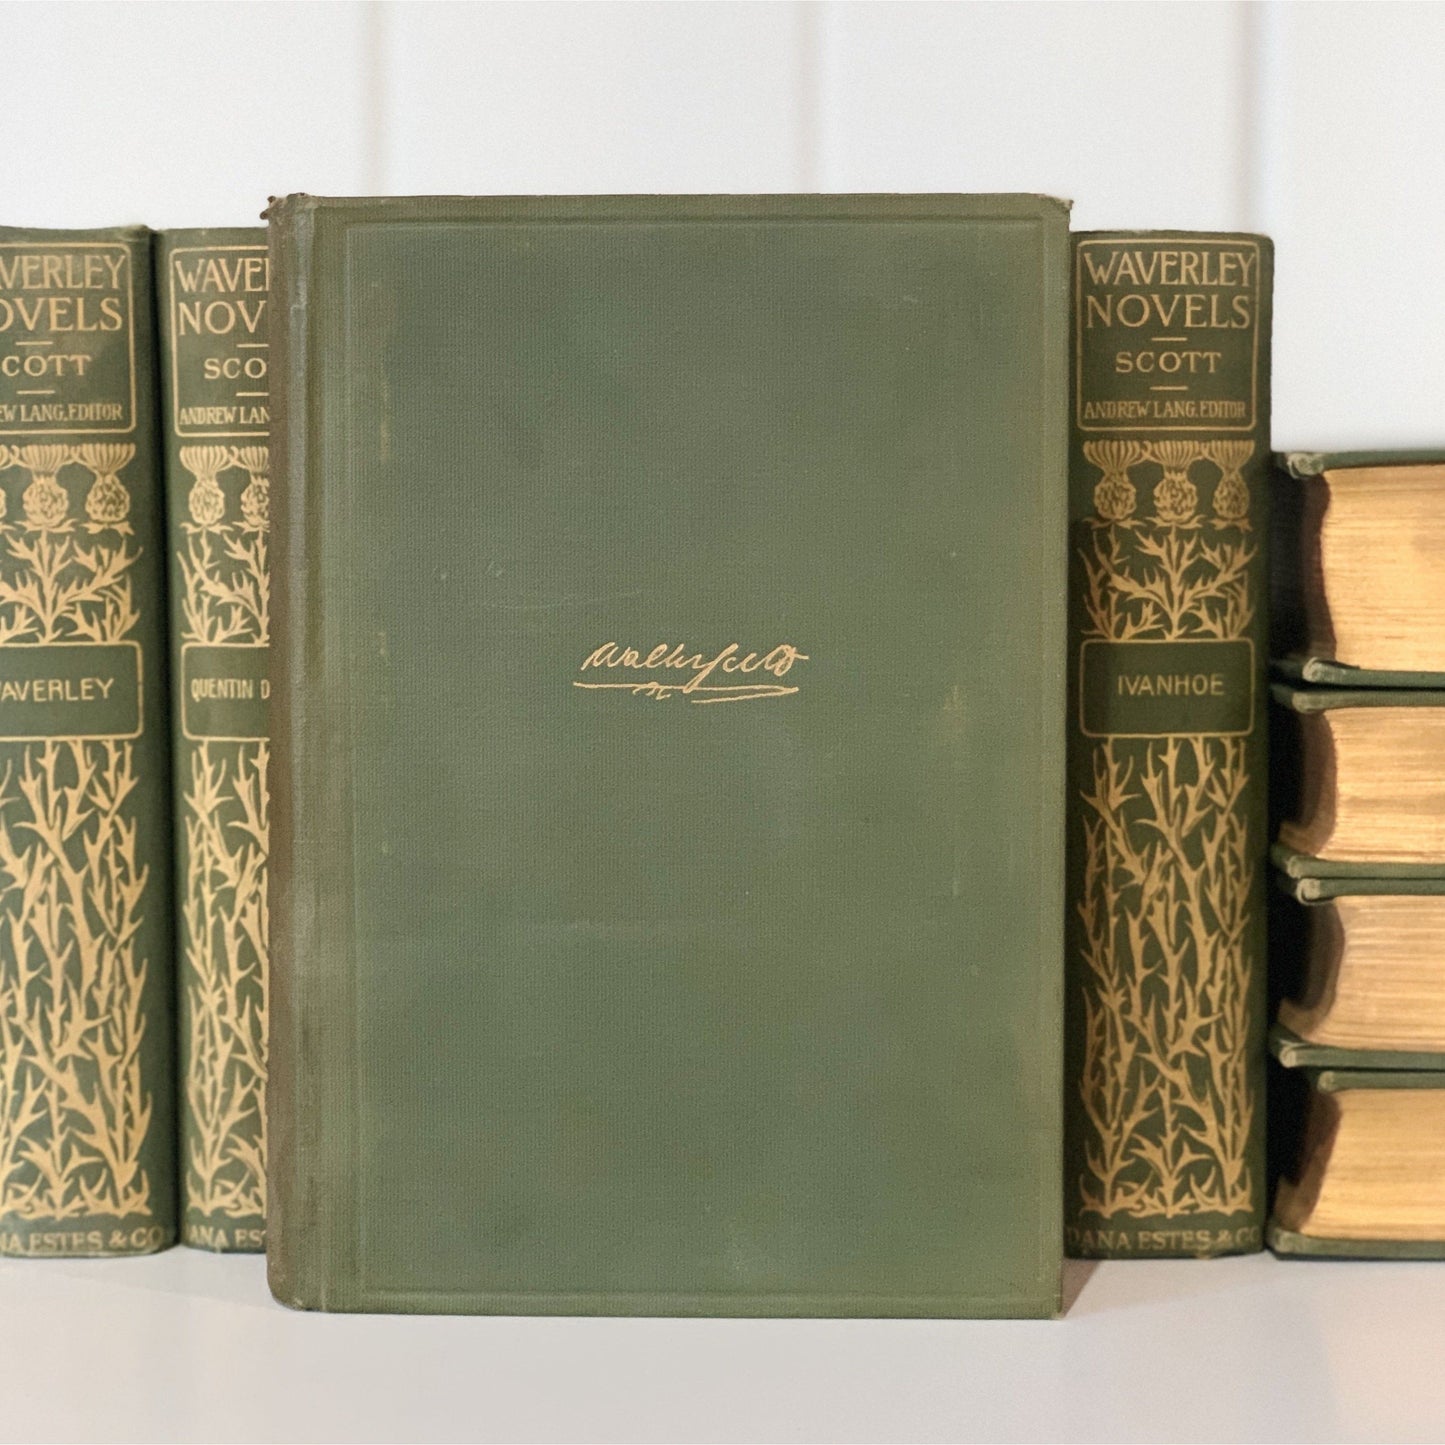 The Waverley Novels, Sir Walter Scott, Andrew Lang Edition, 1894, Antique Large Green Book Set for Shelf Styling